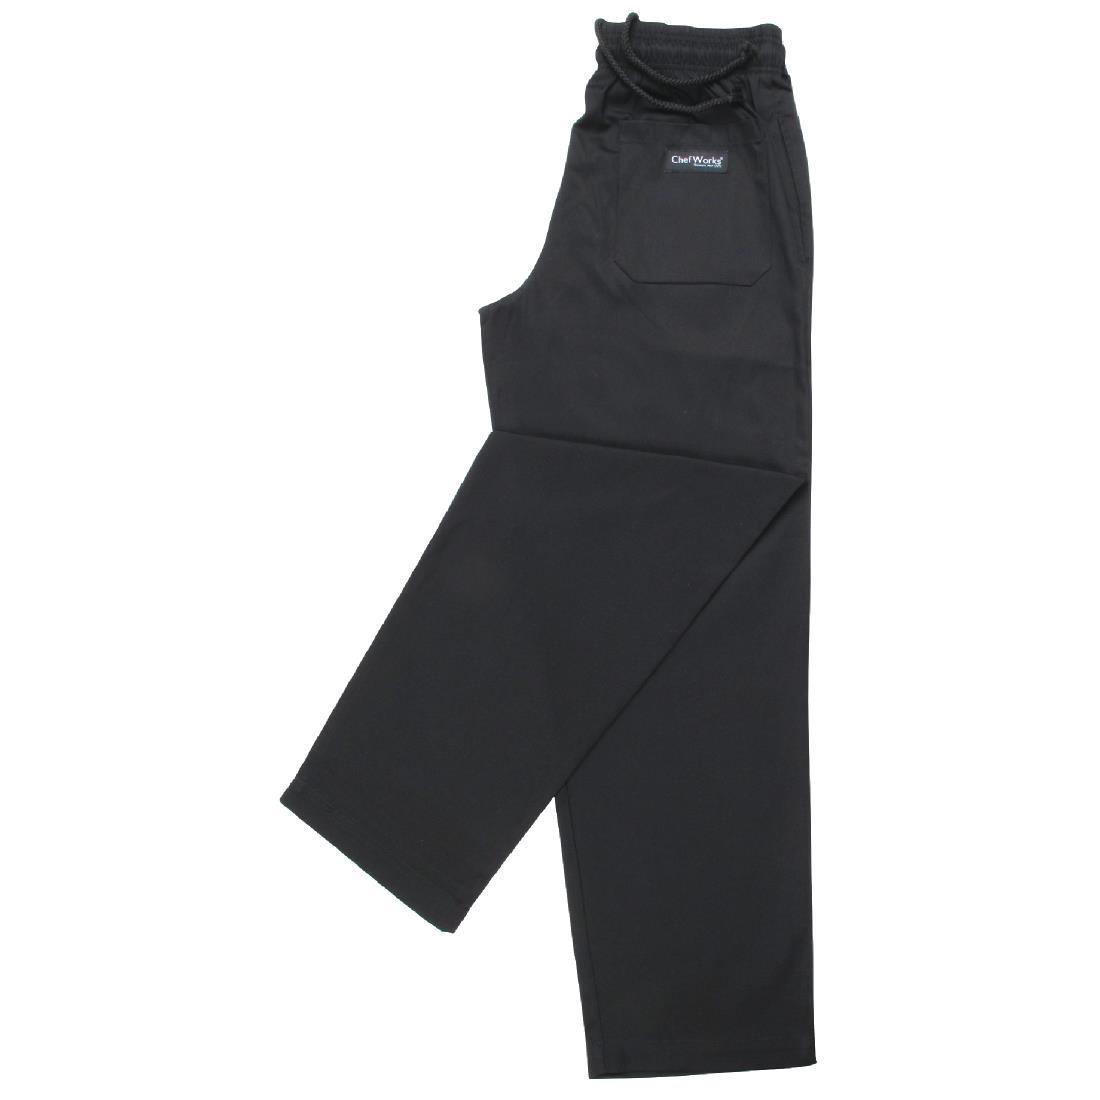 Chef Works Essential Baggy Trousers Black XL - A029-XL  - 2